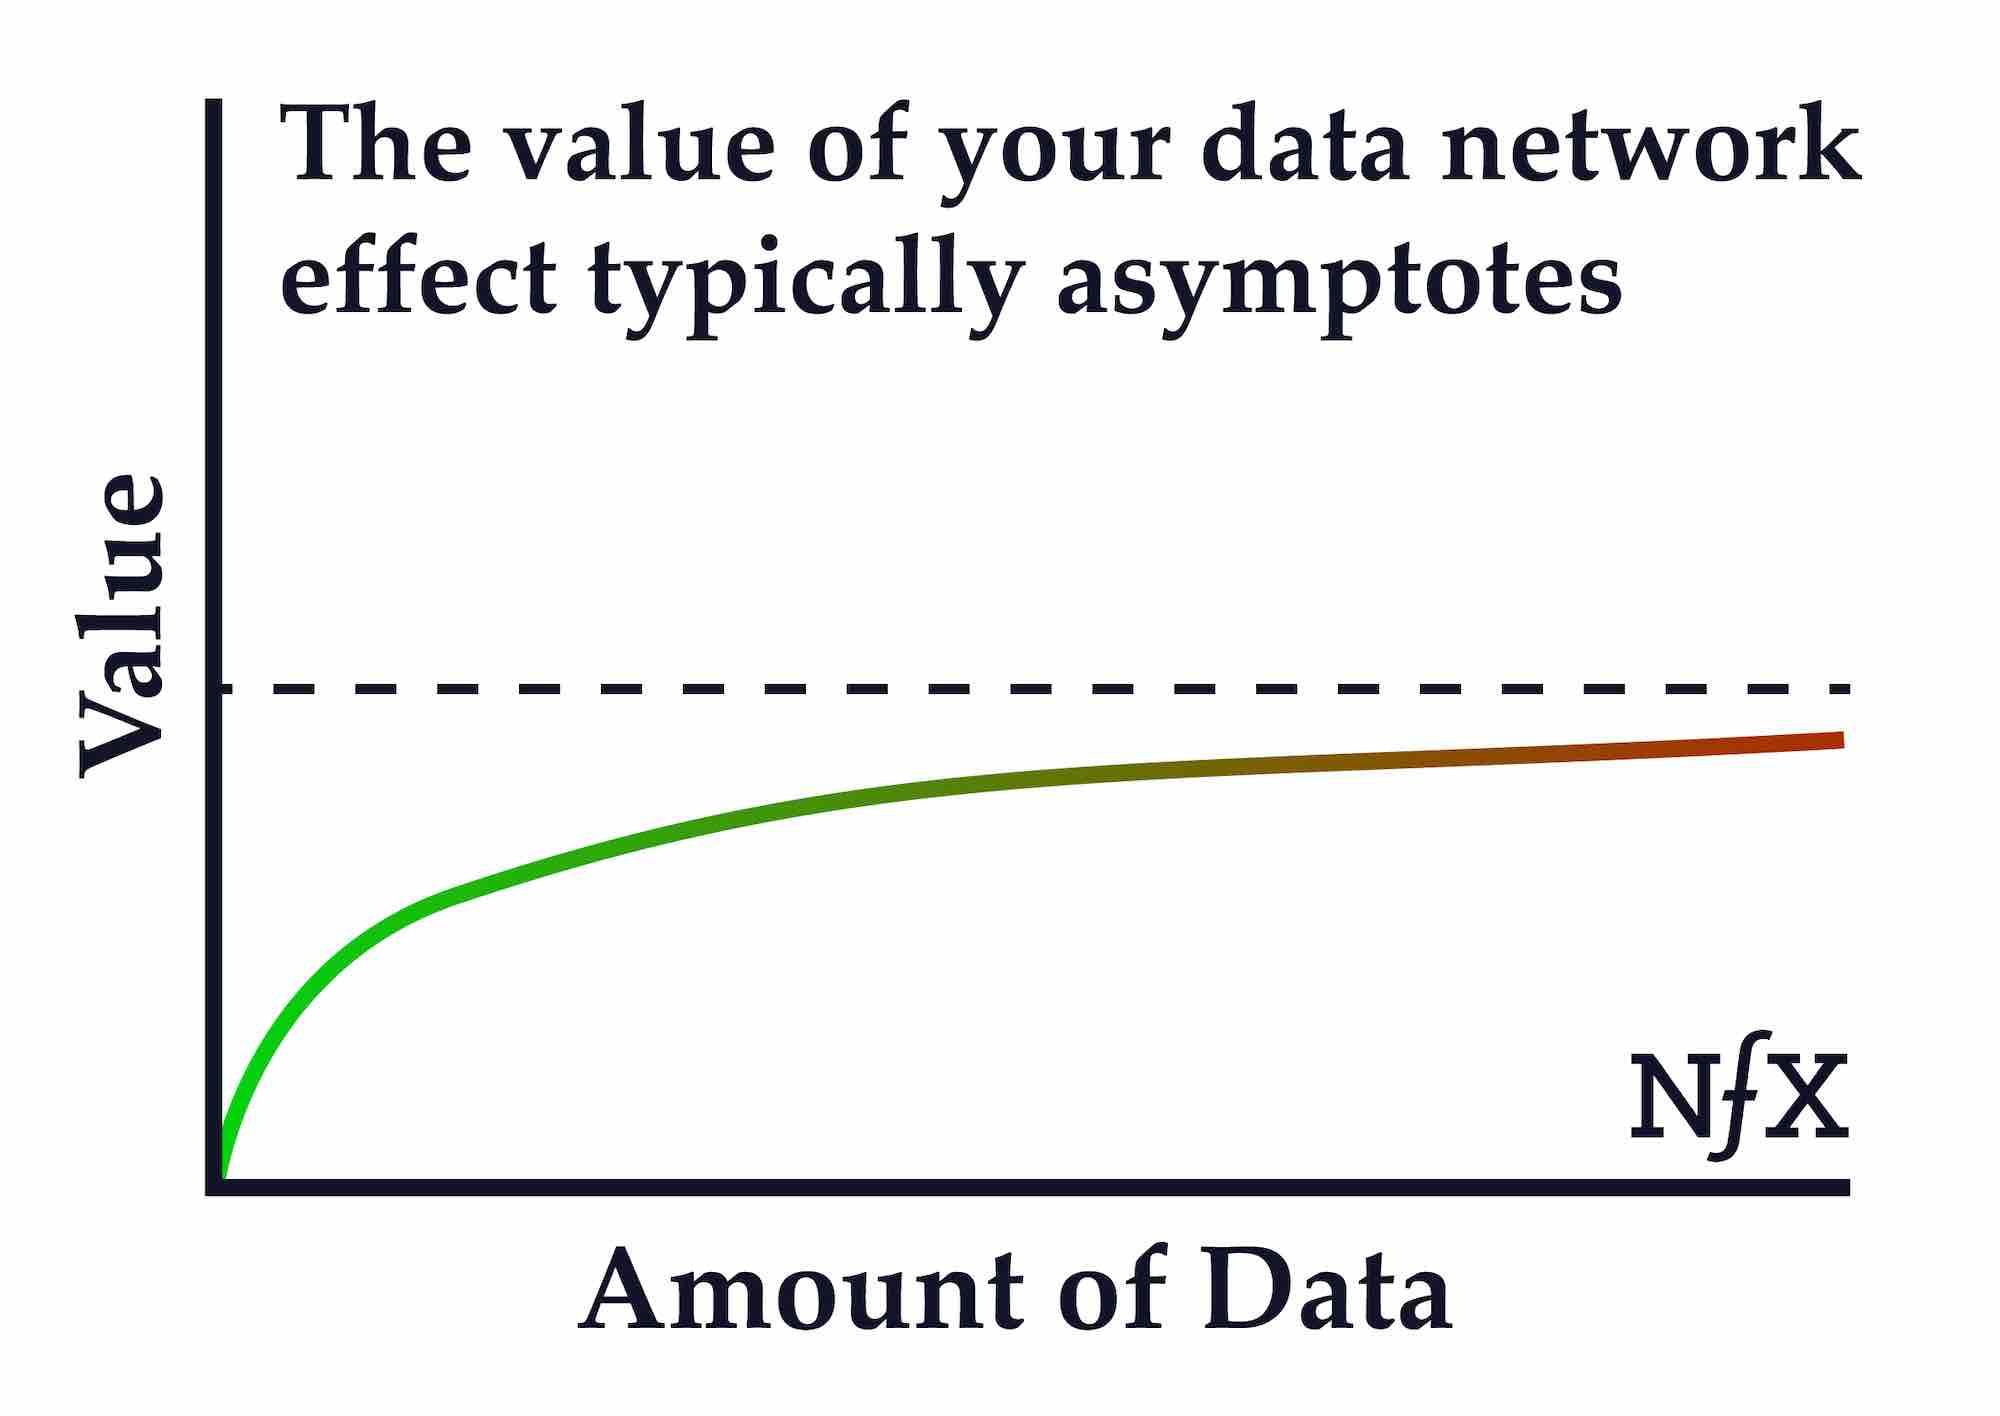 The value of your data network effect typically asymptotes